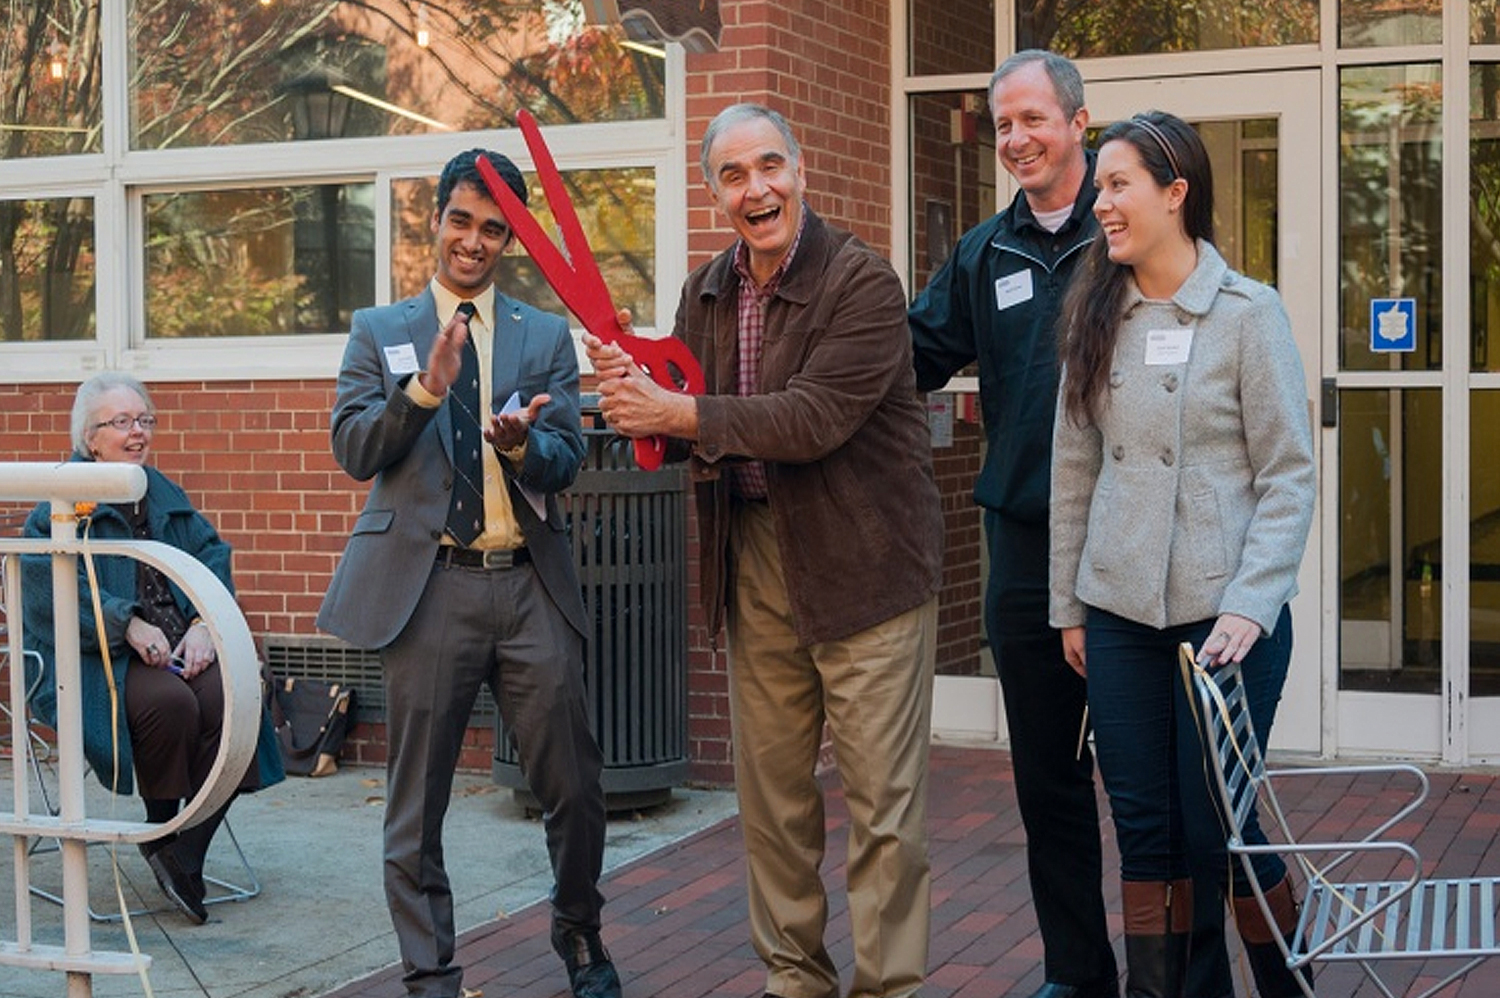 (L-R) Sid Sinha, Tommy Klemis, Walt Ehmer, and Carli Walker celebrate the ribbon cutting for Klemis Kitchen in November 2014. The kitchen officially opened to serve students in spring 2015.